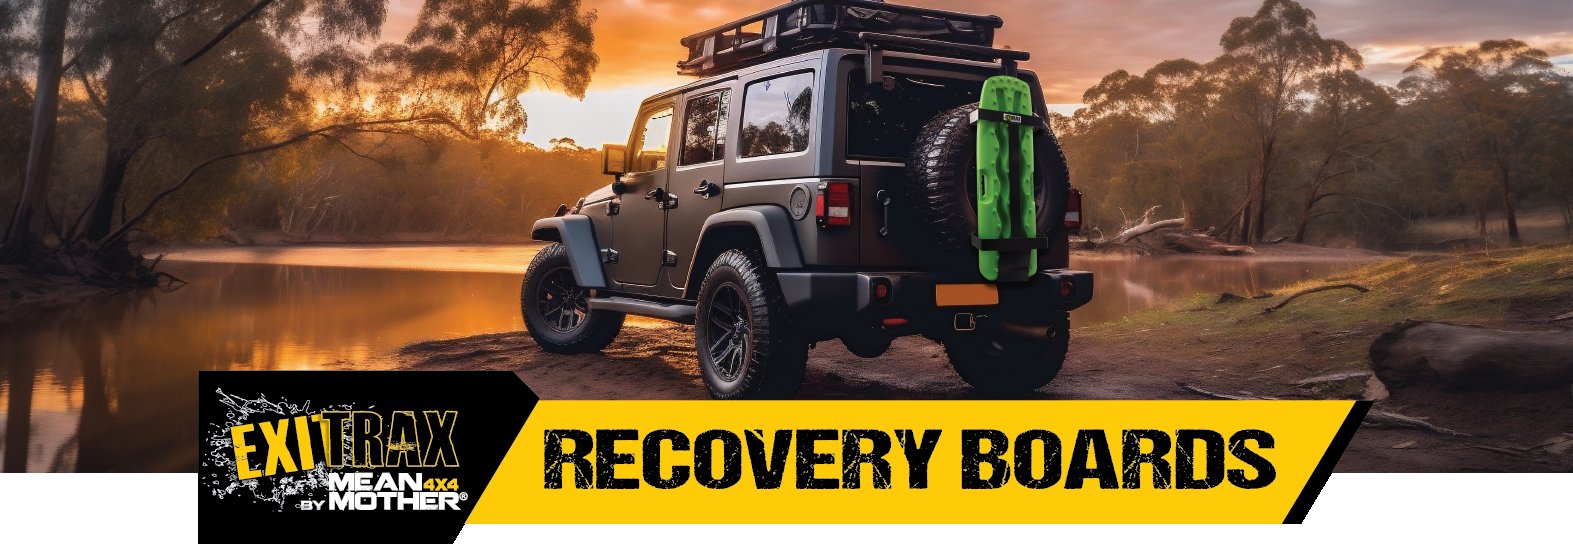 4x4 Recovery Boards  Exitrax Recovery Boards & Accessories — MEAN MOTHER  4X4